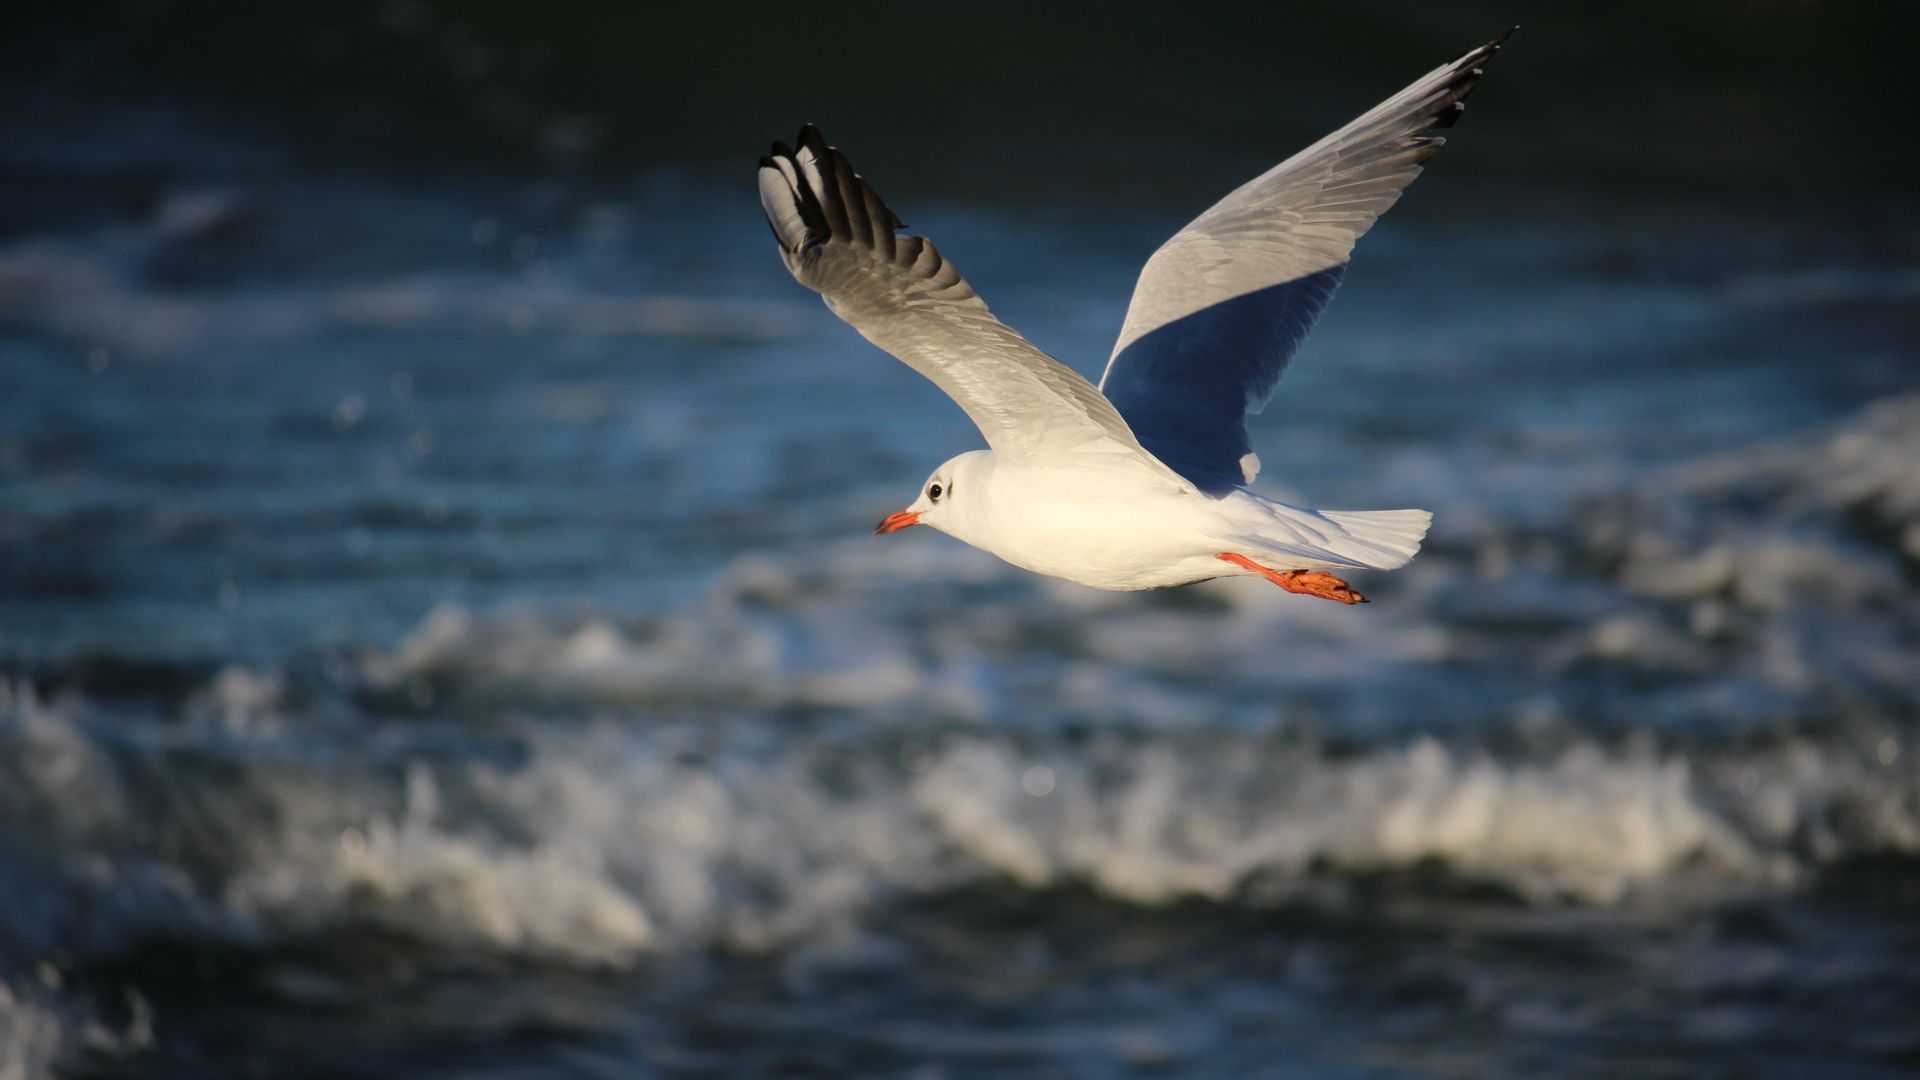 Wallpaper Seagull, gull, wings, water bird, fly over sea